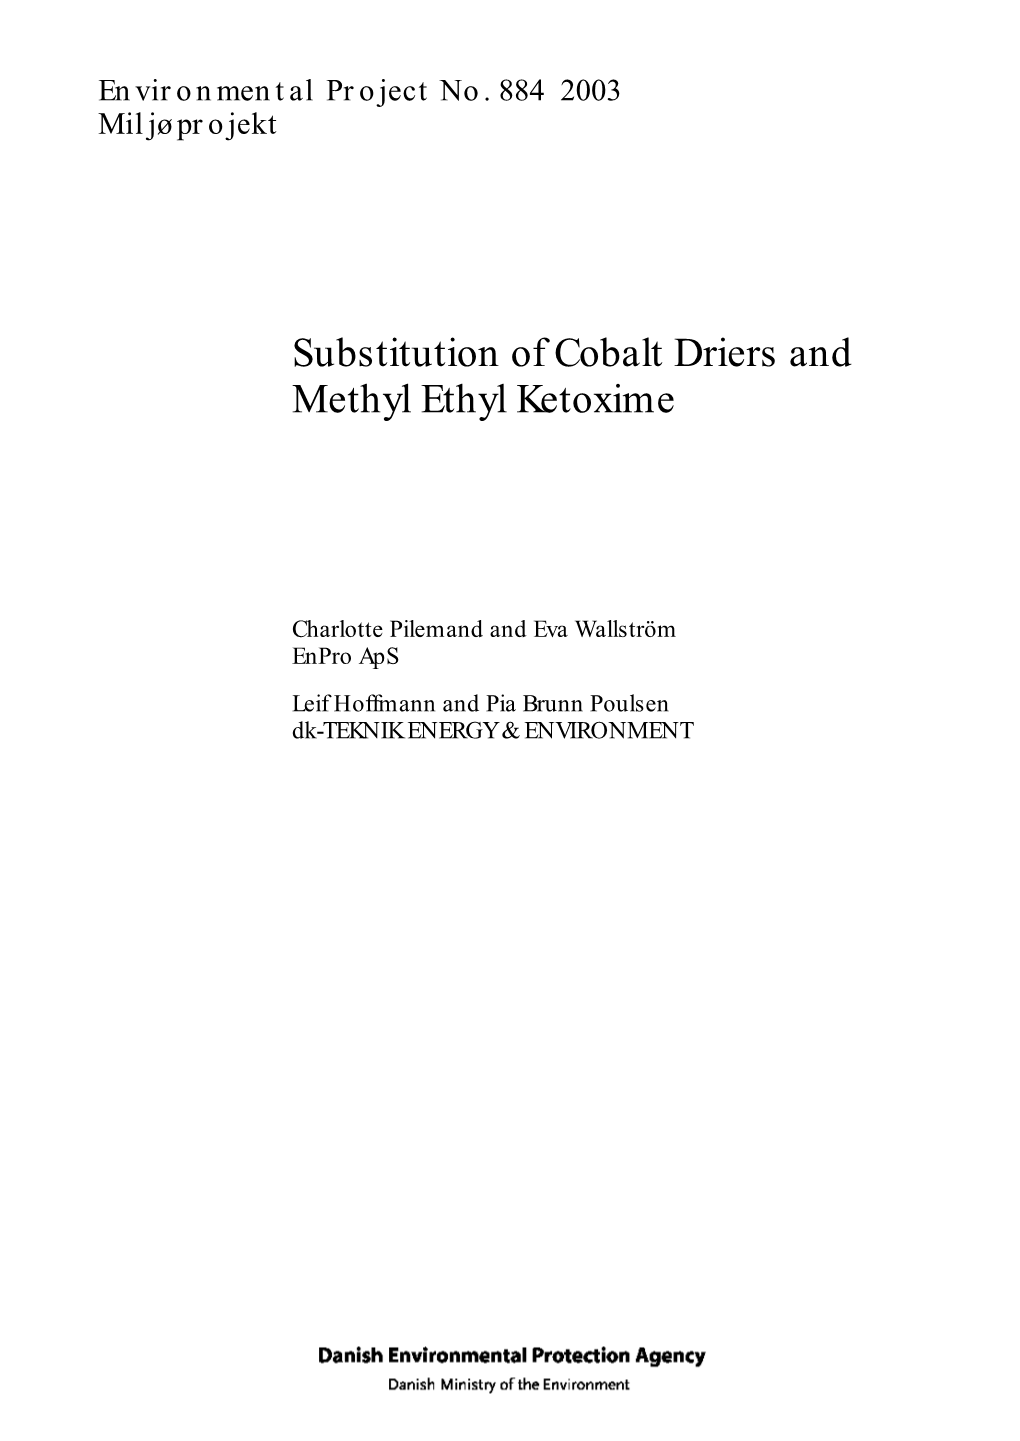 Substitution of Cobalt Driers and Methyl Ethyl Ketoxime